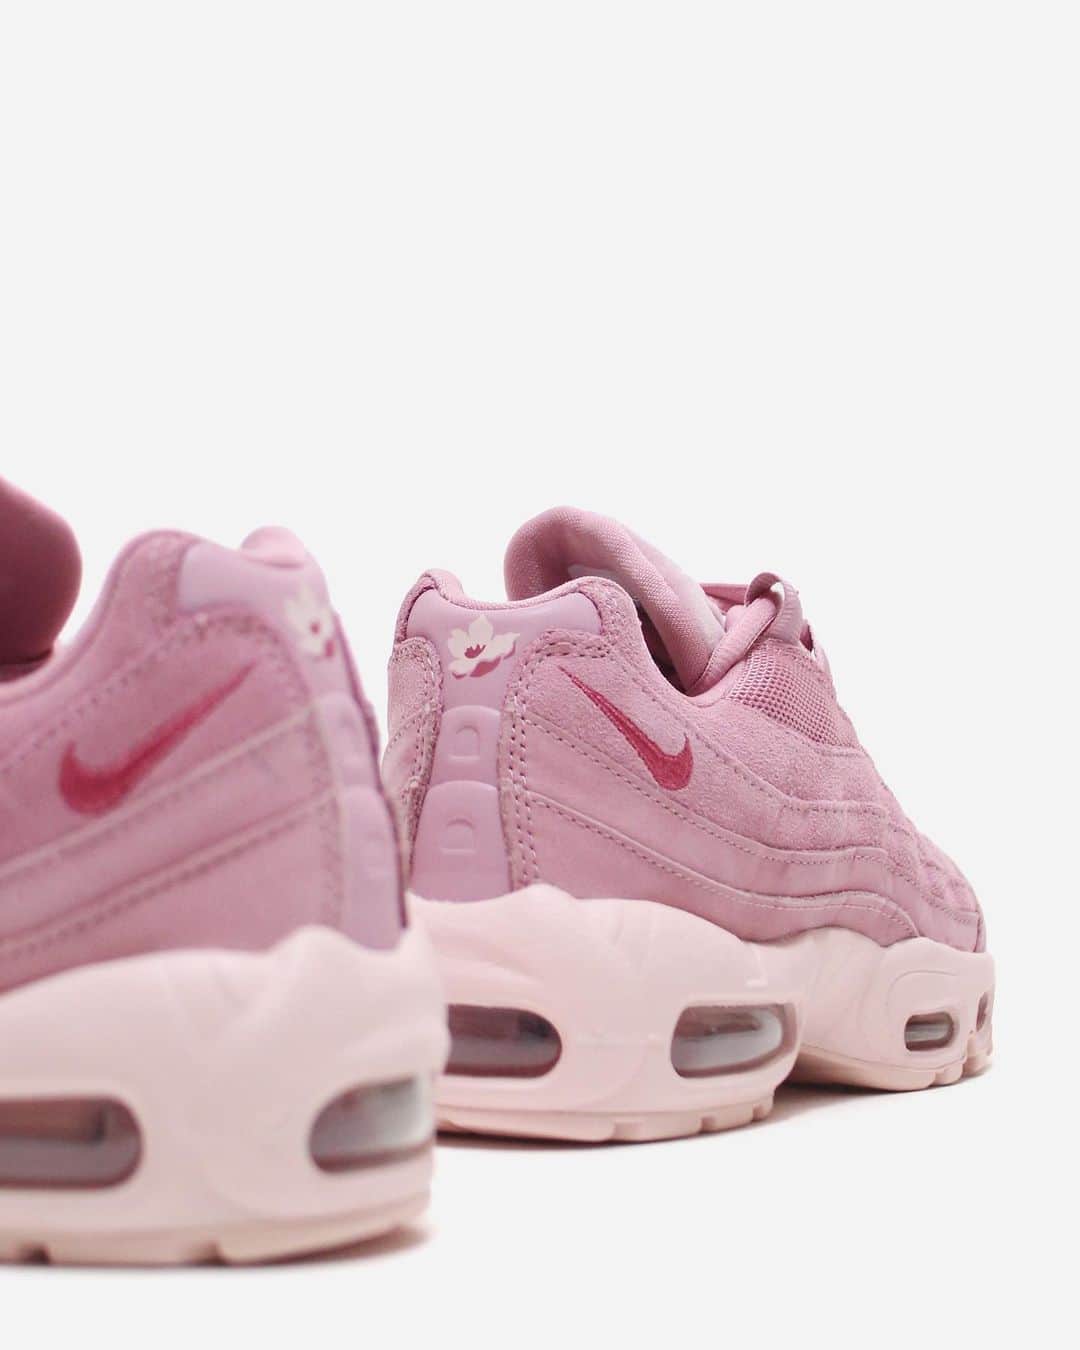 A+Sのインスタグラム：「2021. 2. 24 (wed) in store  ■NIKE WMNS AIR MAX 95 SE COLOR : FIREBERRY SIZE : 22.0cm-25.0cm PRICE : ¥17,000 (+TAX)  柔らかく彩度の高いパステルカラーが華やかなスタイルを演出するナイキ エア マックス 95 SE。 アイコニックなサイドパネルは人体をイメージしたデザイン。ヒールと前足部に内蔵されたMax Airユニットが足を踏み出すたびに衝撃を吸収します。  Soft and gorgeous style. The Nike Air Max 95 SE creates a gorgeous style with soft, highly saturated pastel colors. The iconic side panel is designed with the image of the human body. The Max Air unit built into the heel and forefoot absorbs shock each time you step on it.  #a_and_s #NIKE #AIRMAX #NIKEAIRMAX #NIKEAIRMAX95 #NIKEWMNSAIRMAX95SE」